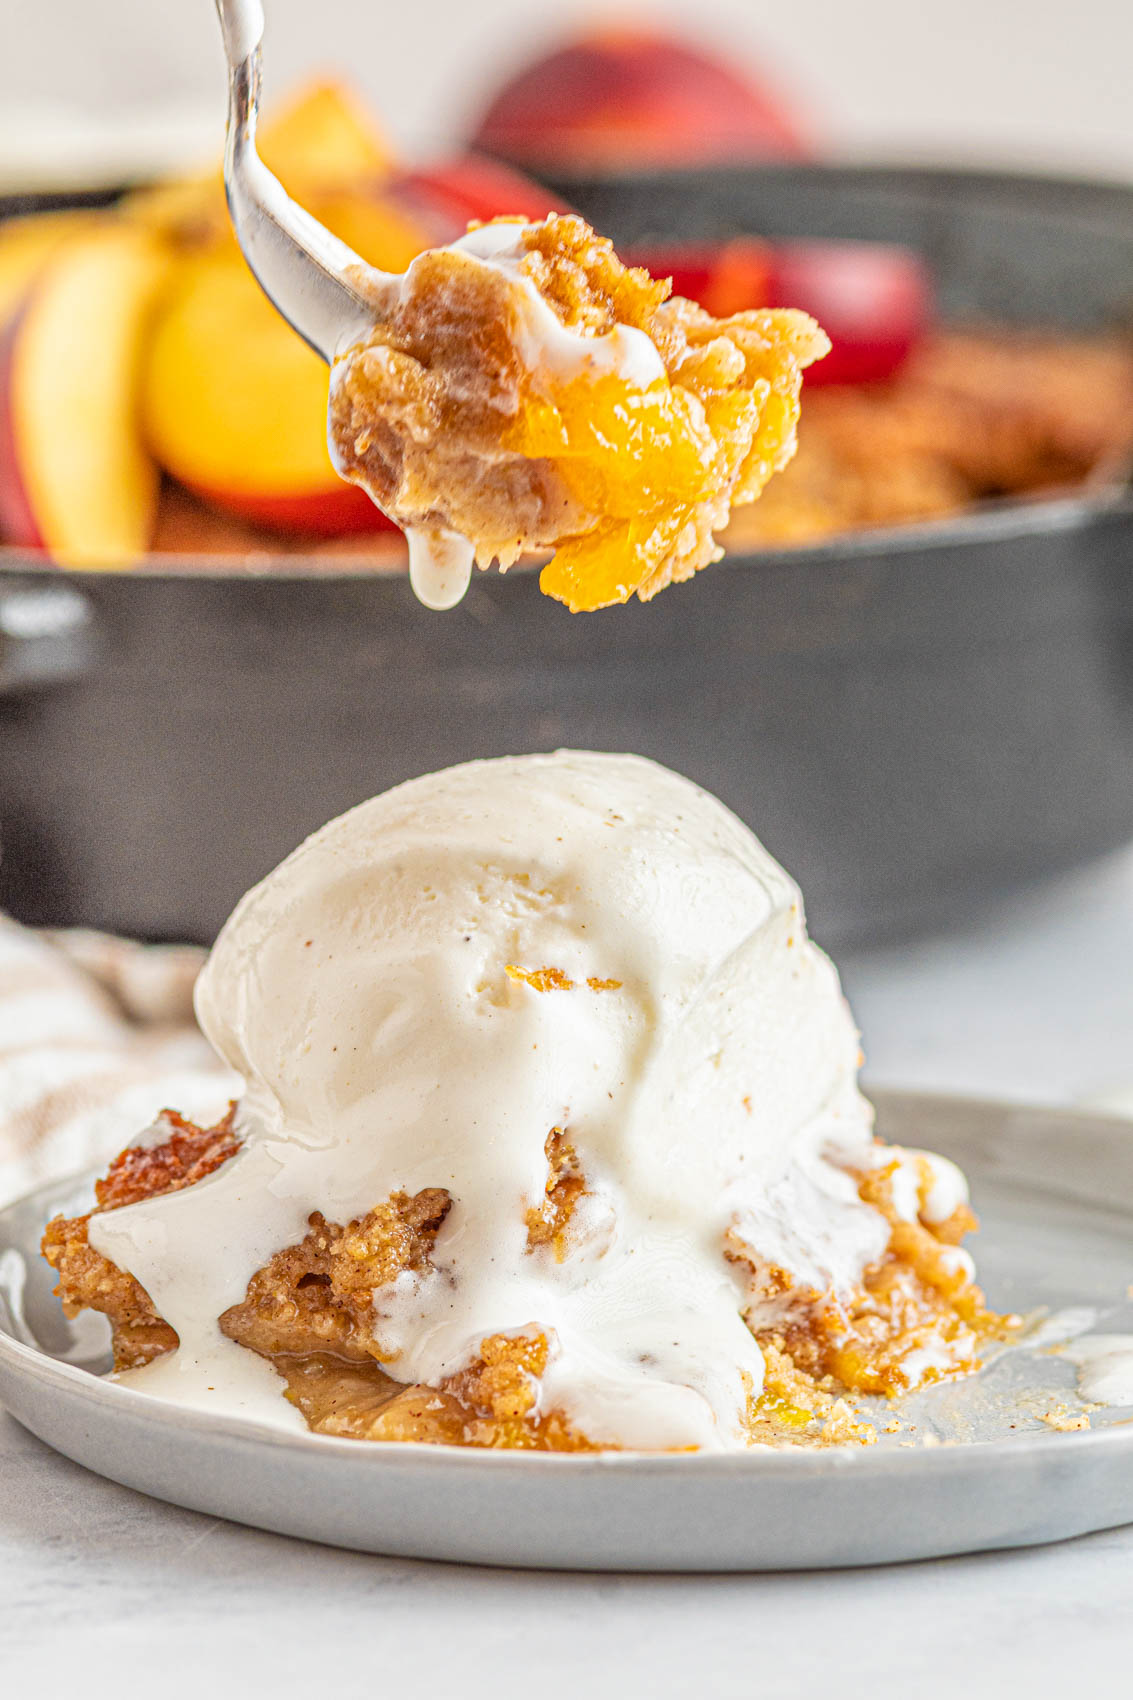 melting ice cream on top of peach cobbler scoop on a plate